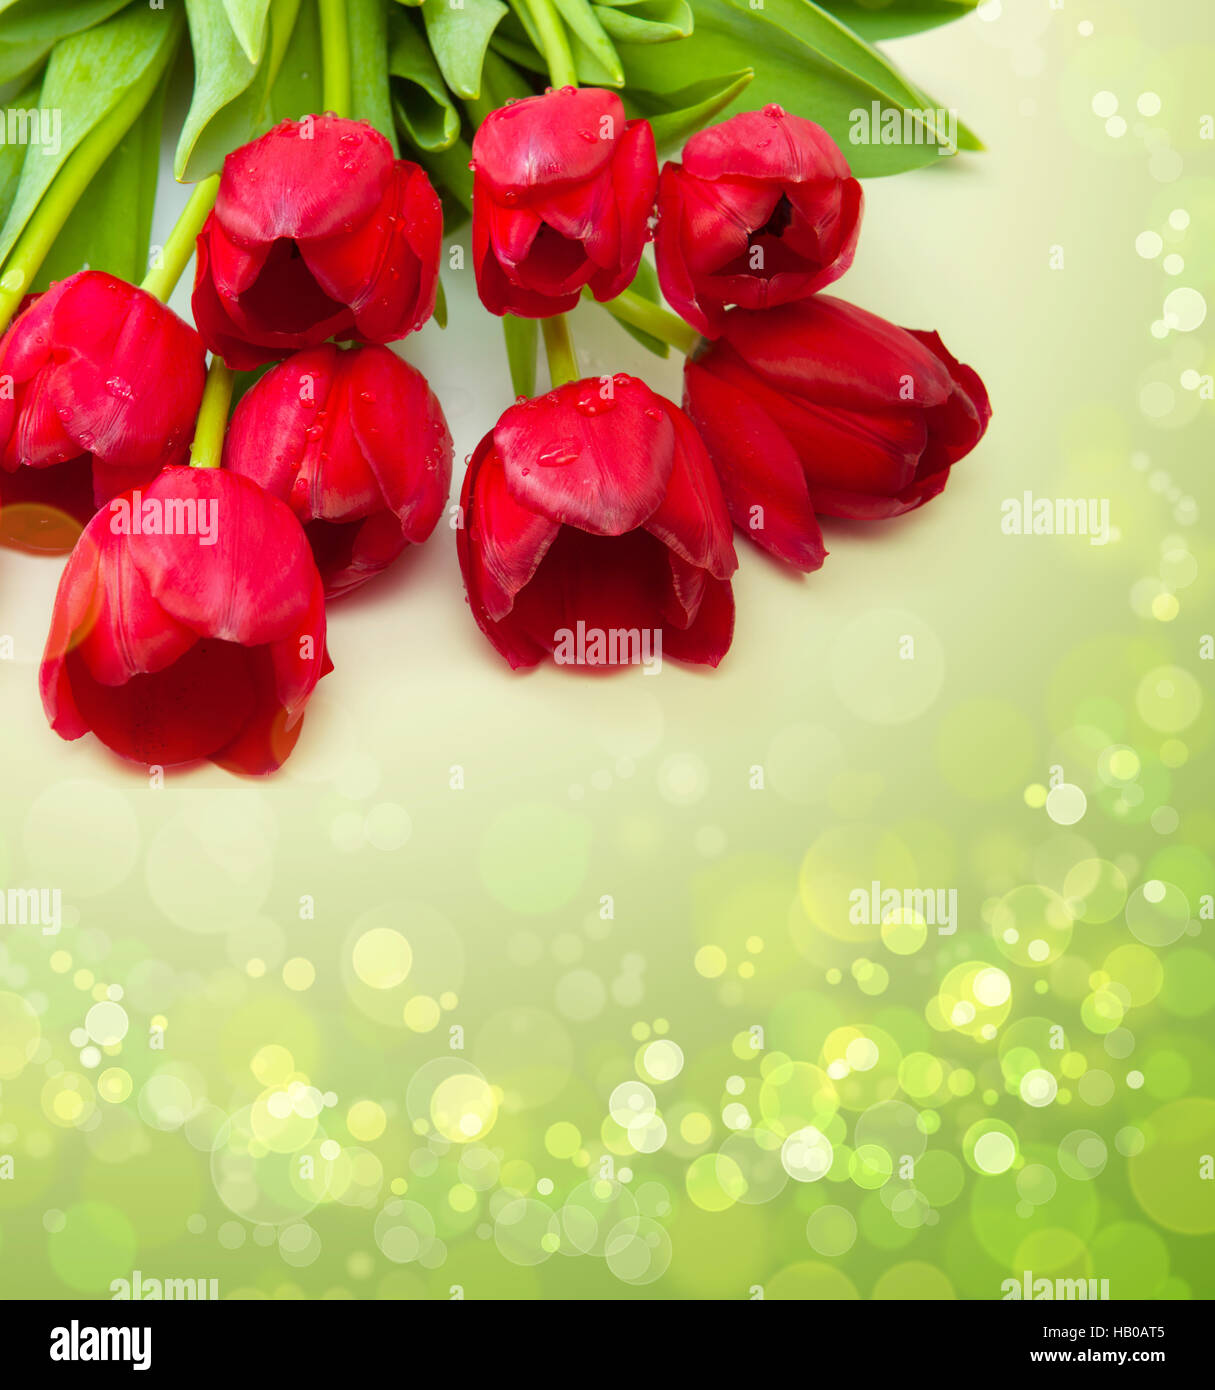 Red tulips  isolated on green  background. Stock Photo